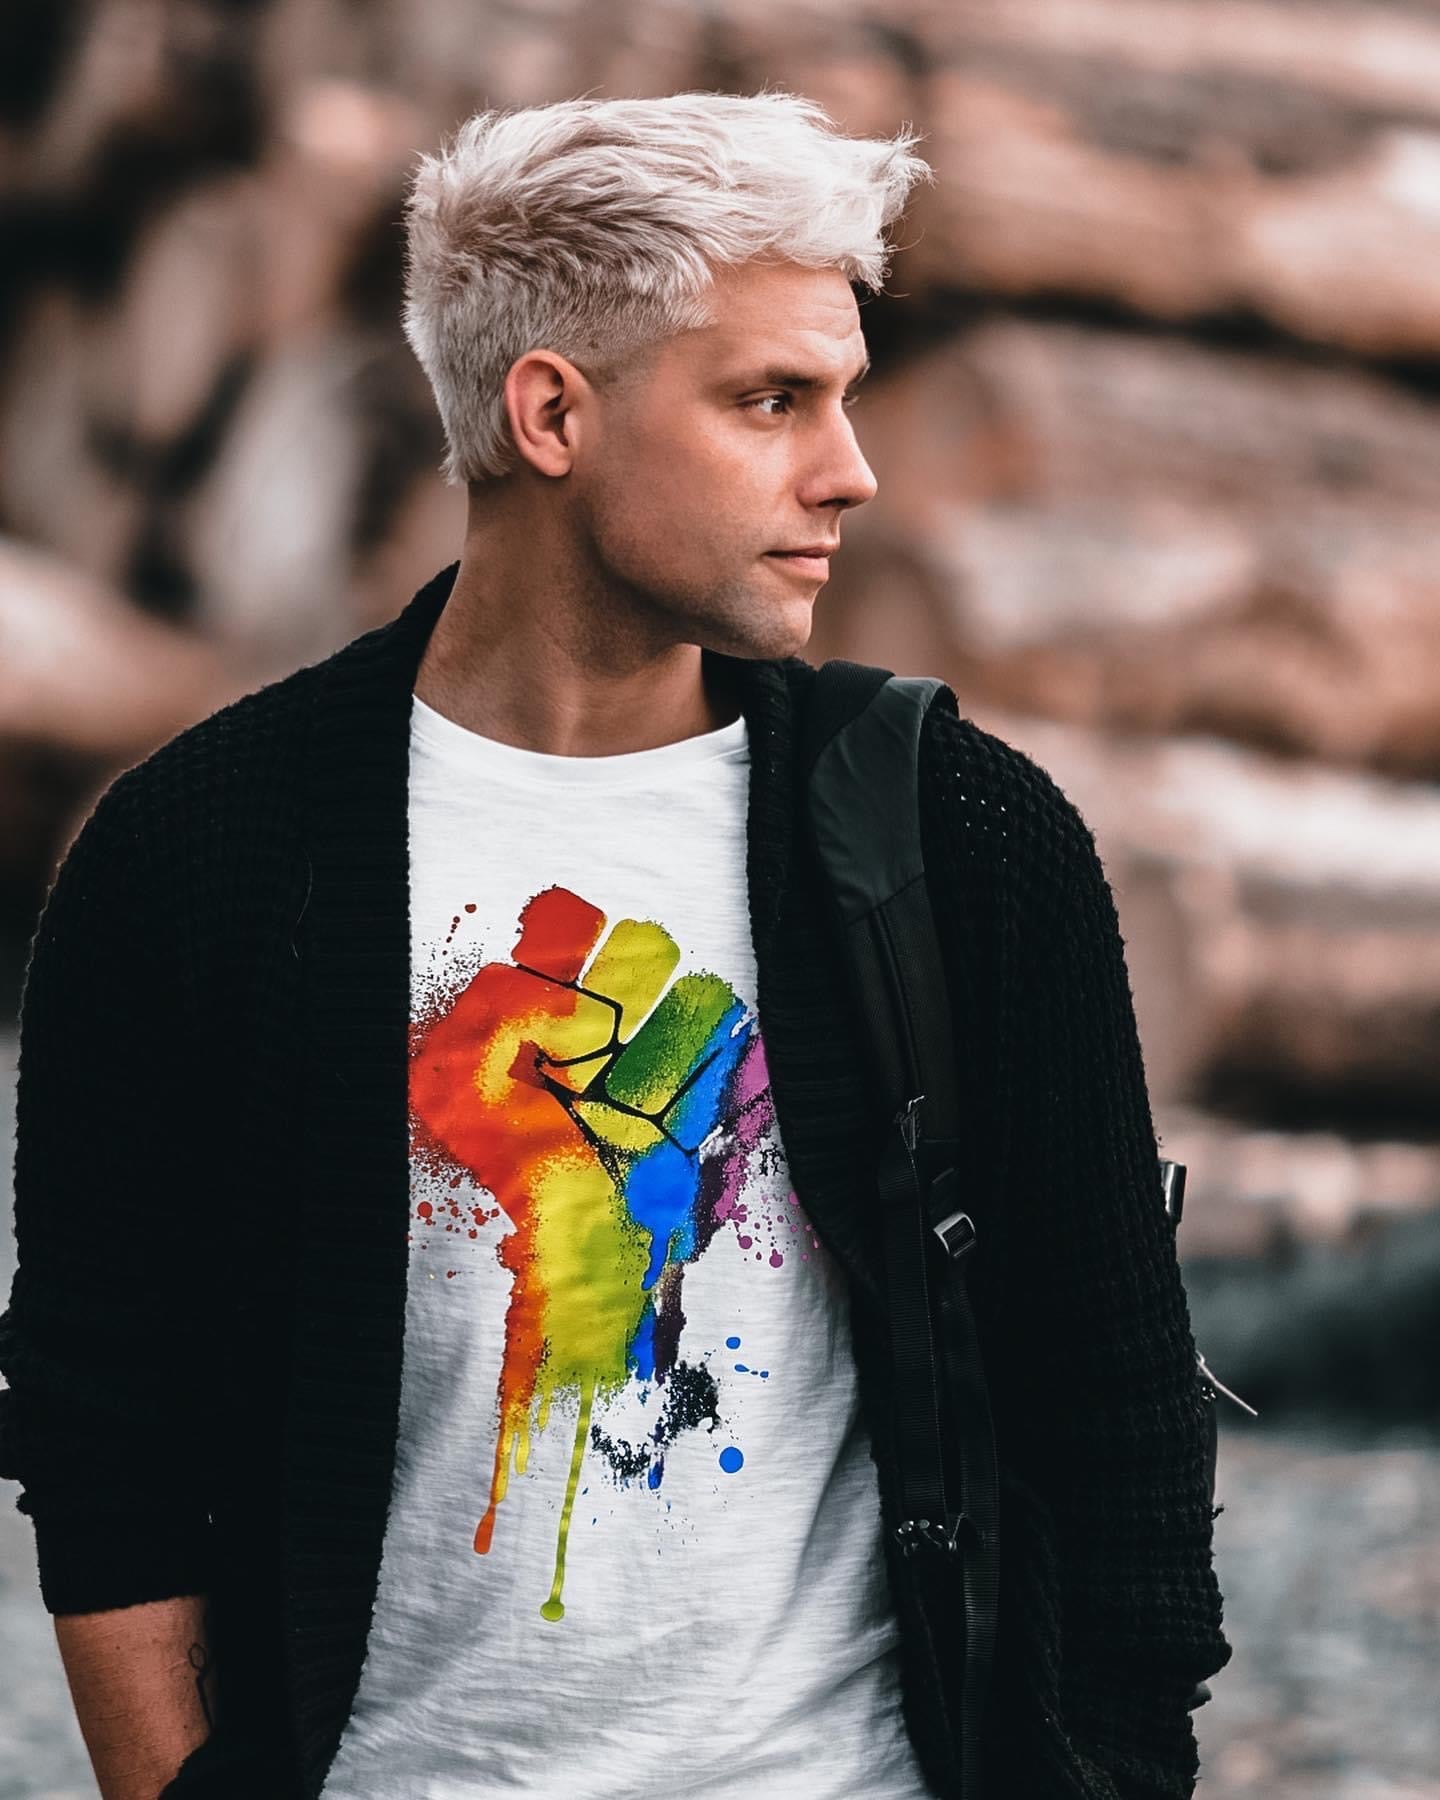 Step into a world of empowerment and self-expression with our Pride Collection of graphic shirts. Designed for the LGBTQ+ community and supporters, these captivating tees celebrate gay pride, transgender rights, and LGBTQ+ visibility. Make a statement with these vibrant and meaningful designs that embody the journey of acceptance, resilience, and unity, while promoting love, equality, and social justice.